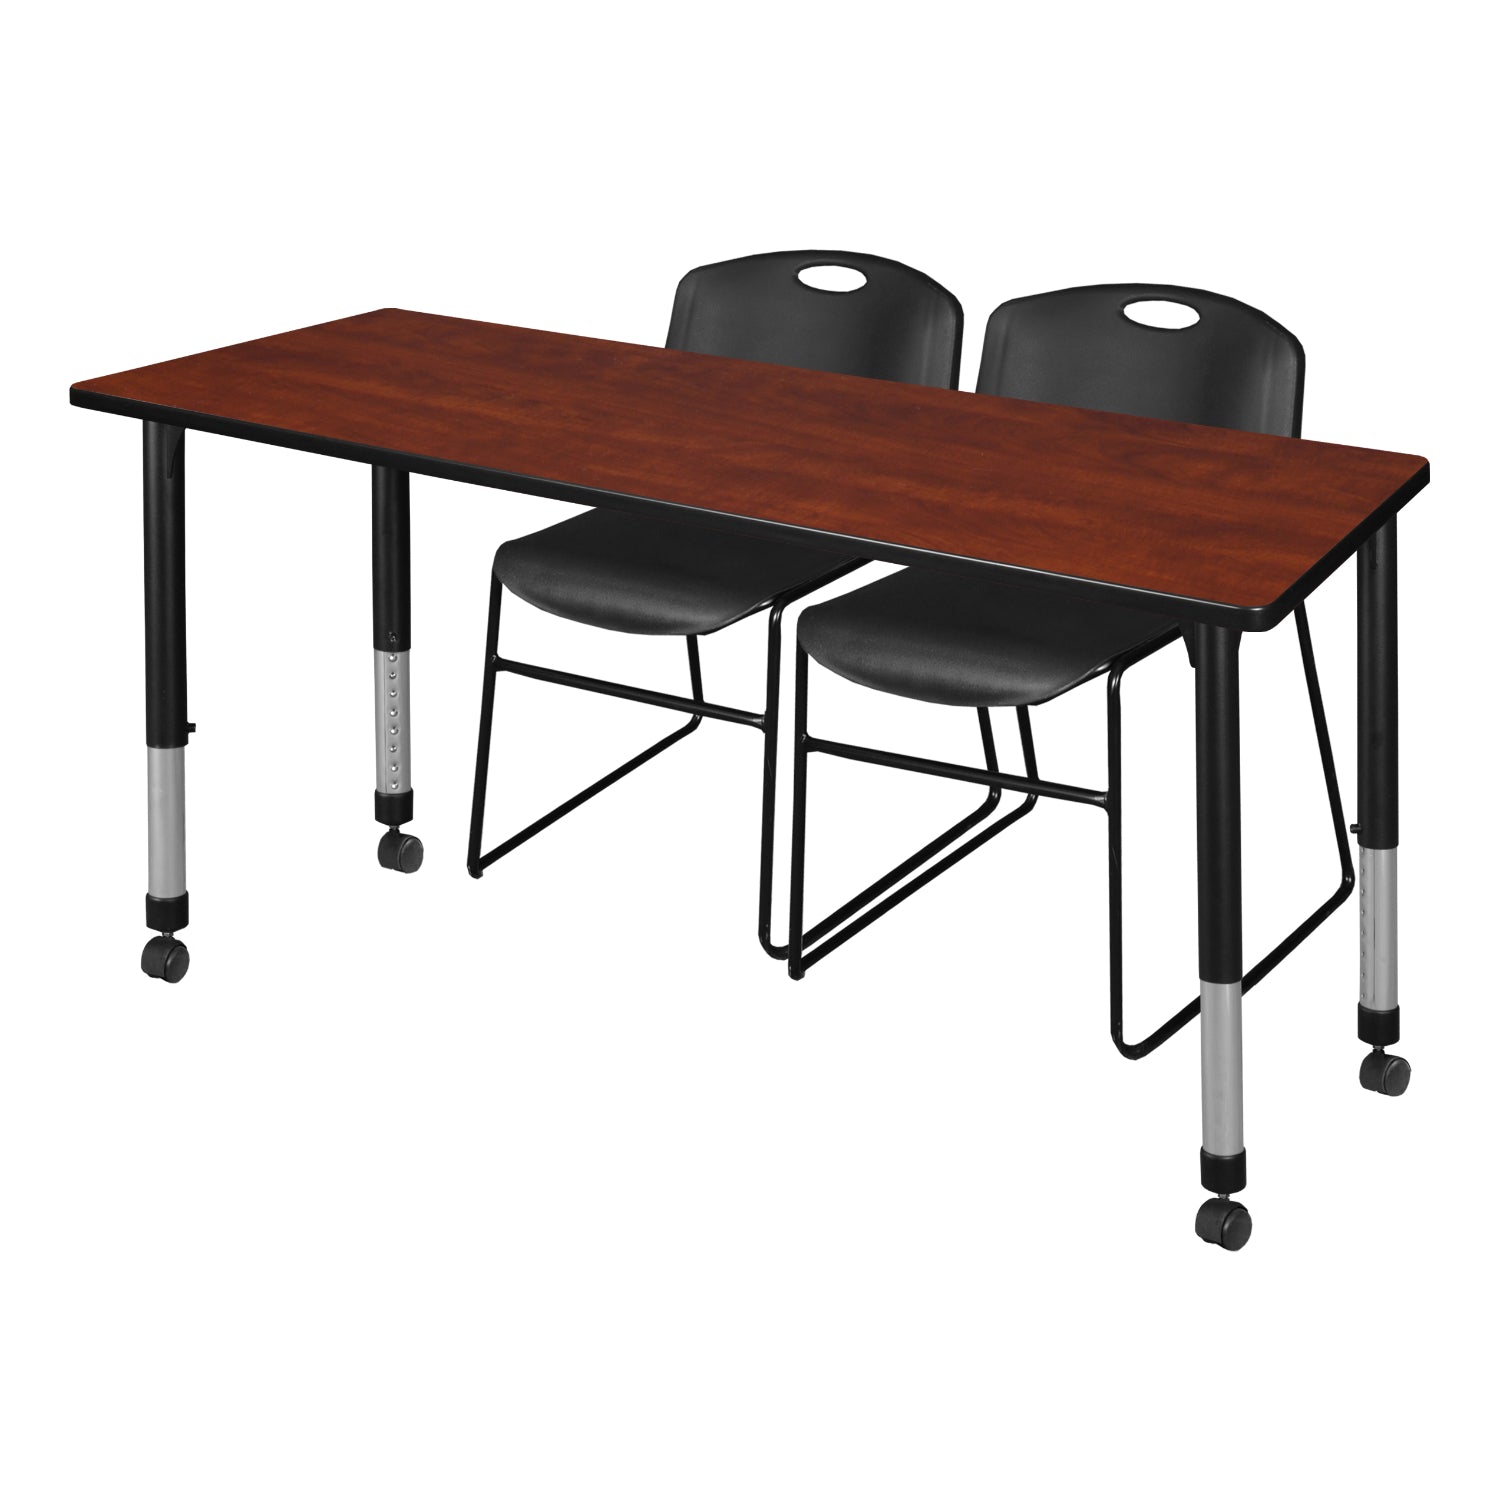 Kee Classroom Table and Chair Package, Kee 60" x 30" Rectangular Mobile Adjustable Height Table with 2 Black Zeng Stack Chairs